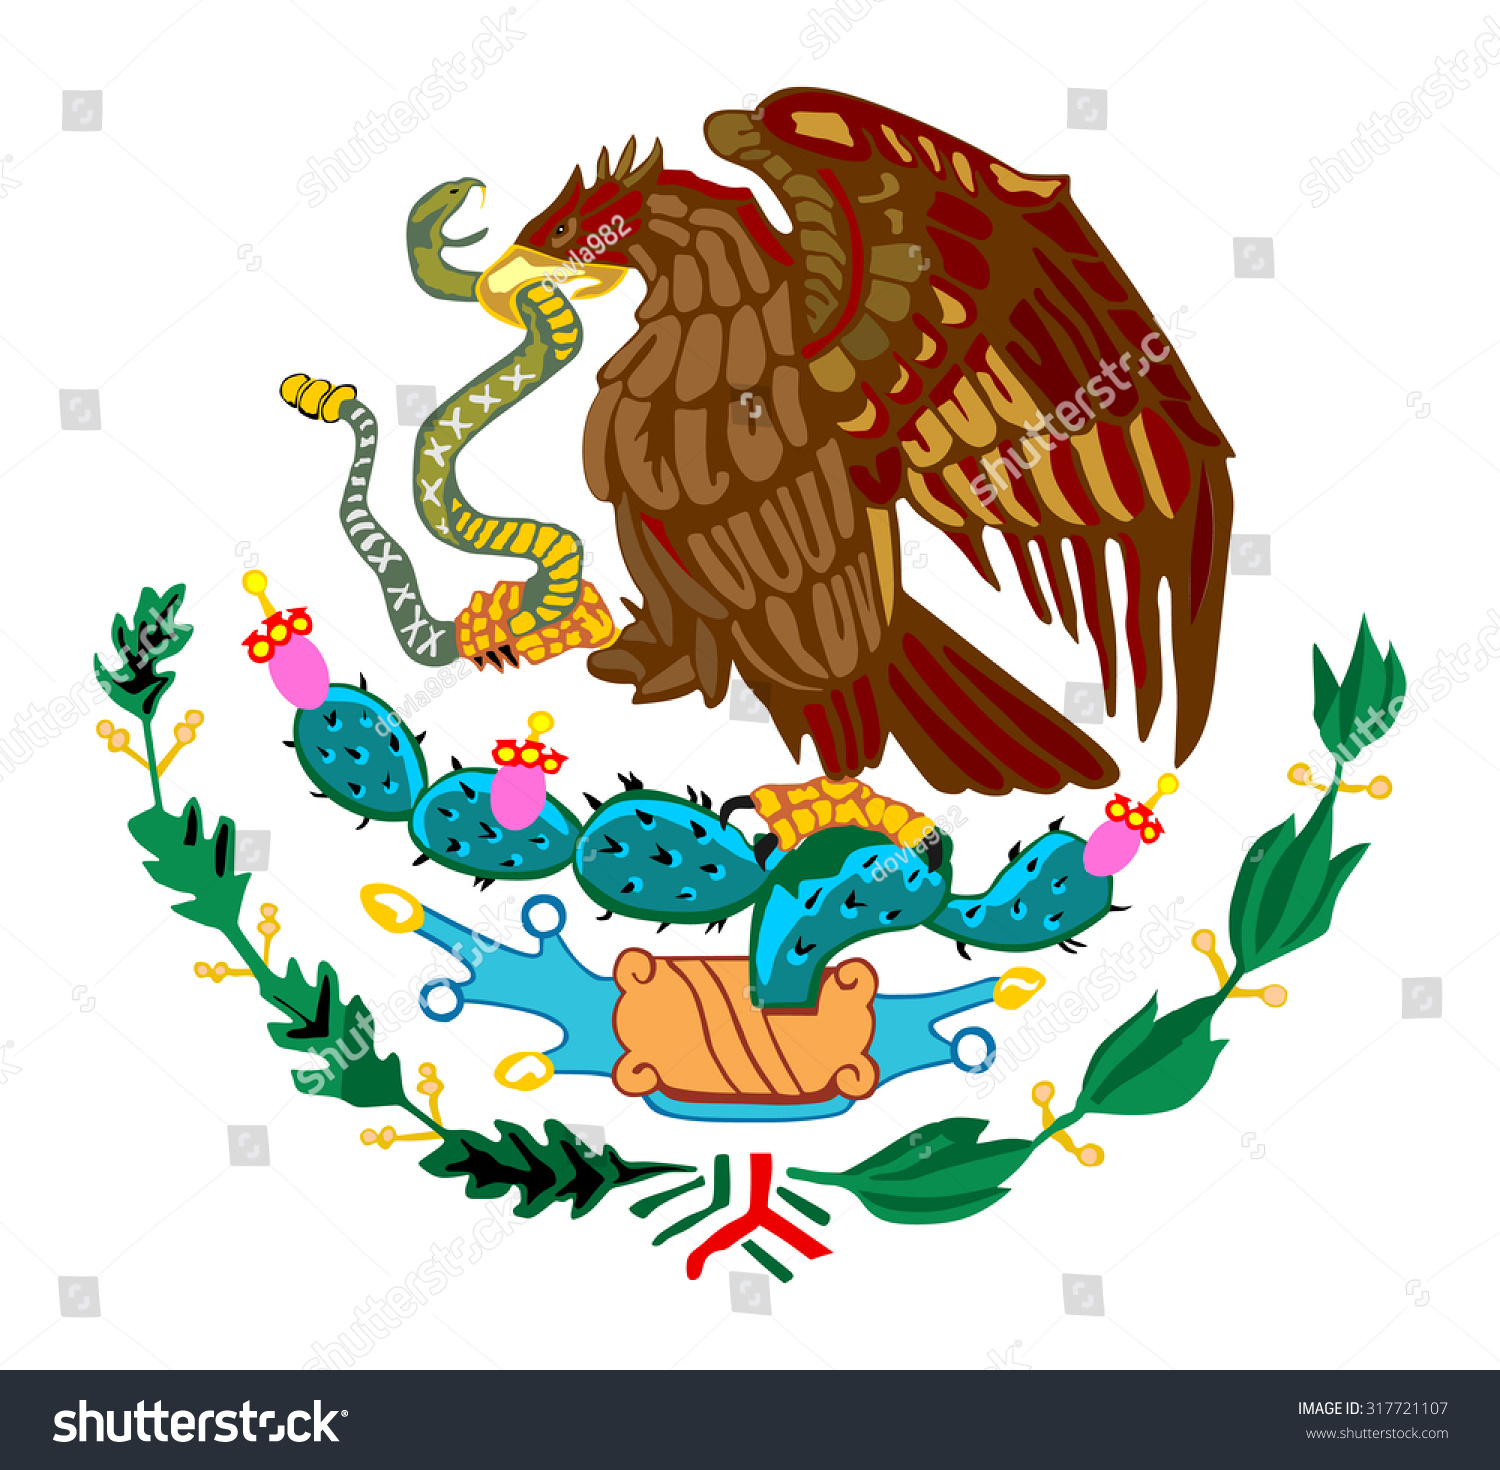 Mexico Coat Of Arms, Seal, National Emblem, Isolated On White ...